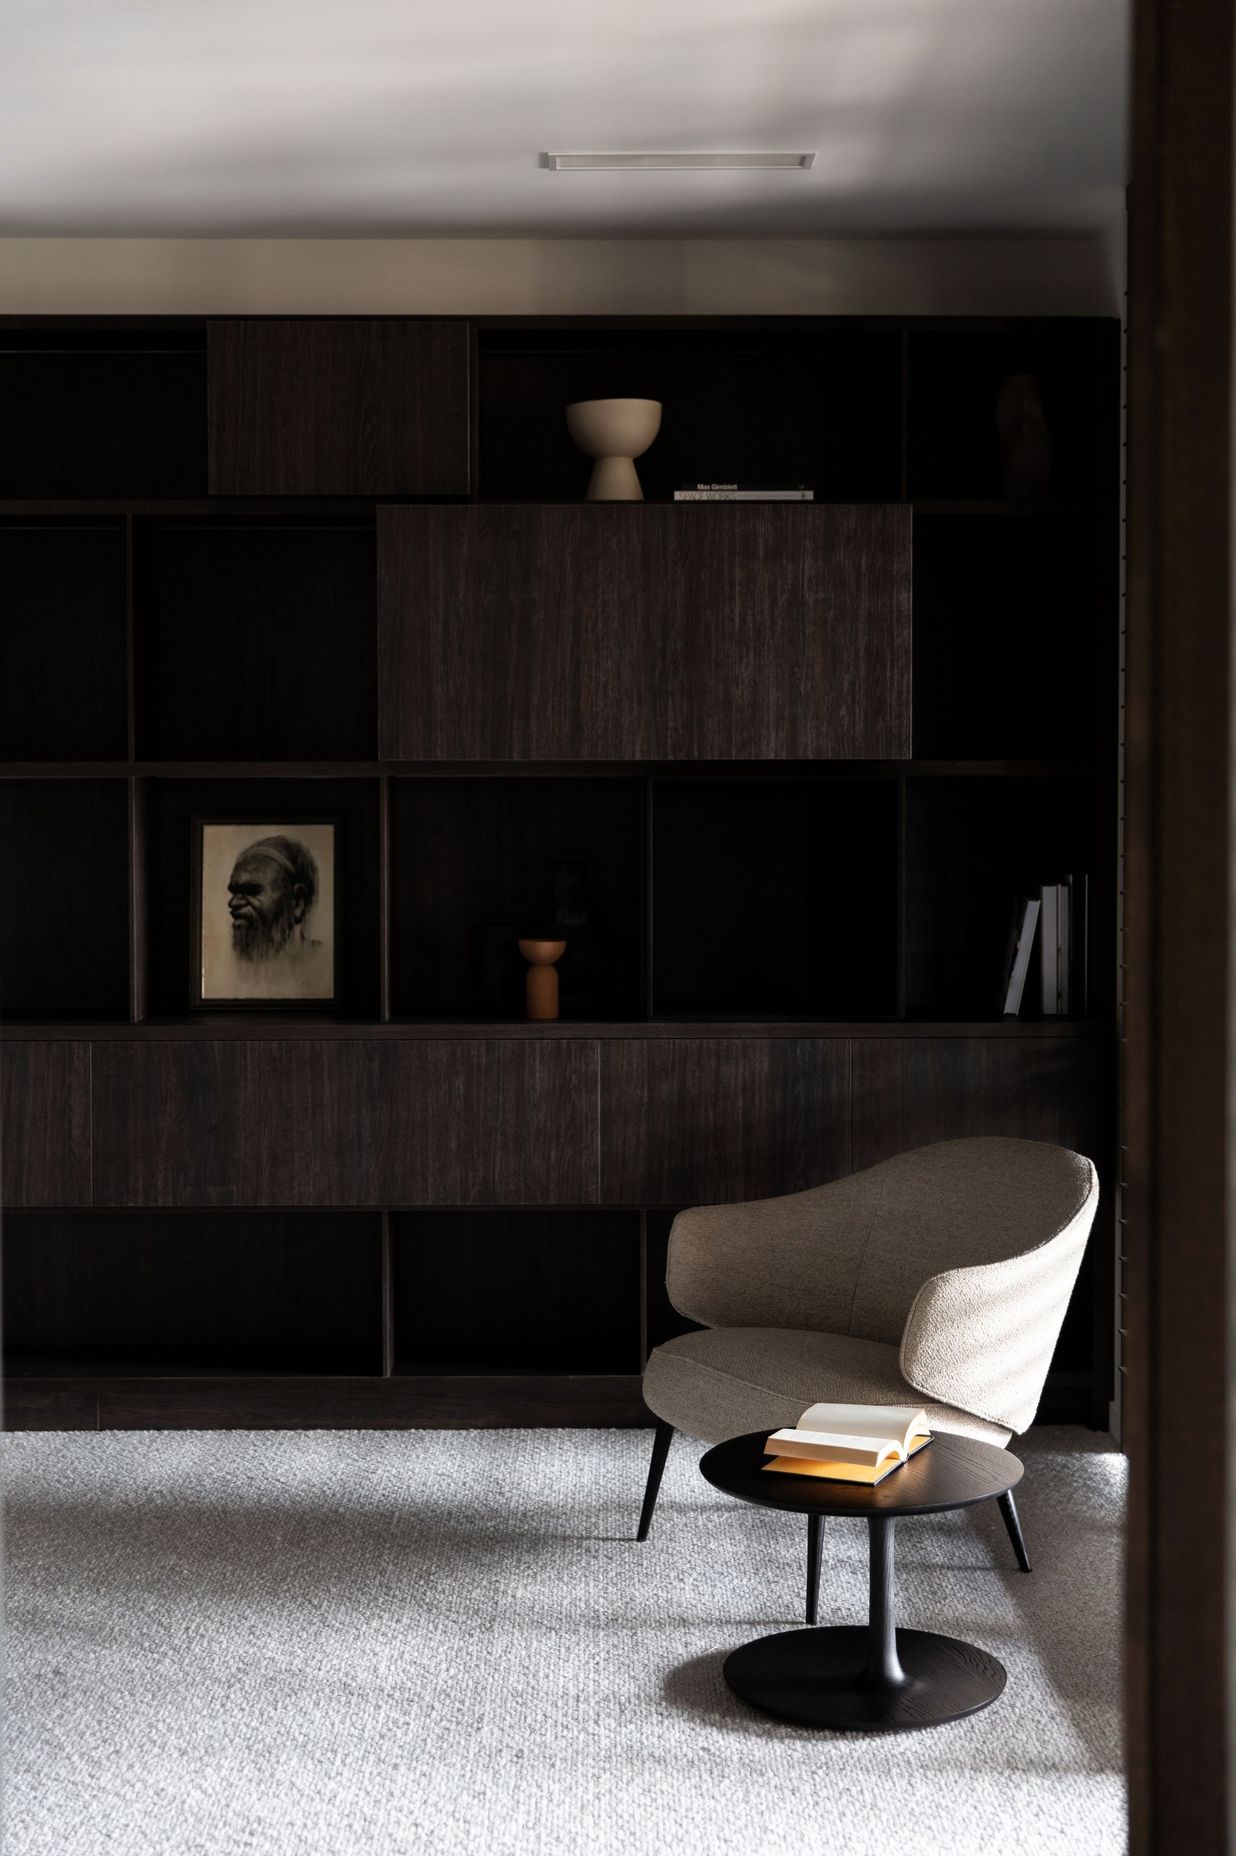 The study, designed with staggering cabinetry with varying depths | Photographer: Anna McLeod